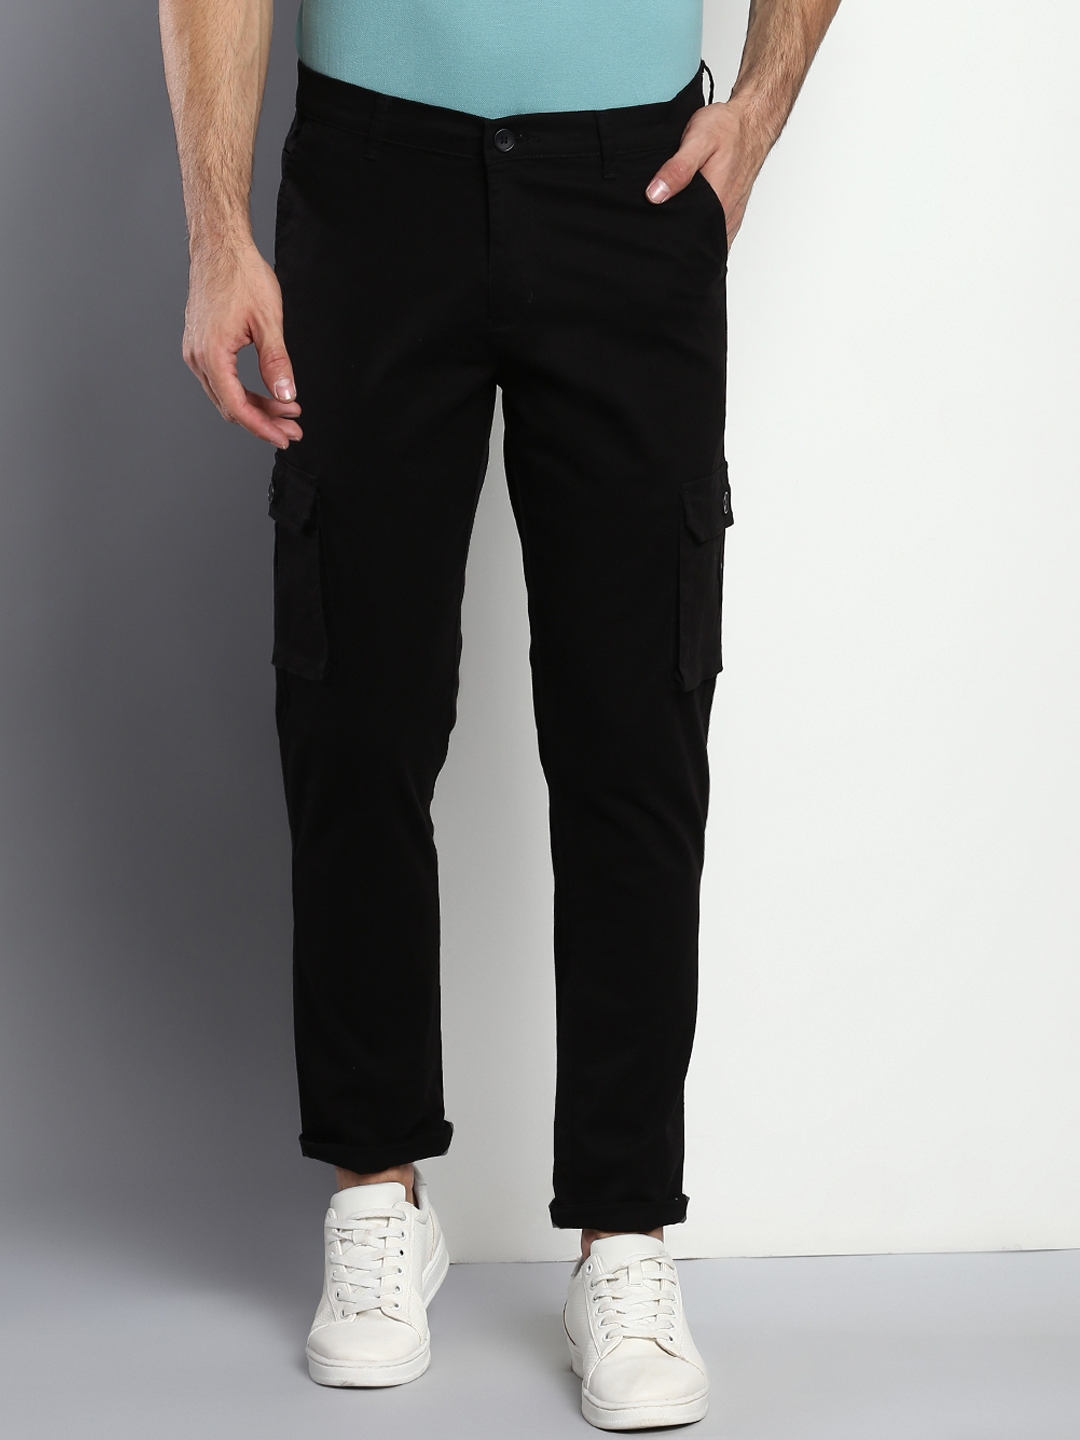 Buy Dennis Lingo Men Black Tapered Fit Cargos Trousers - Trousers